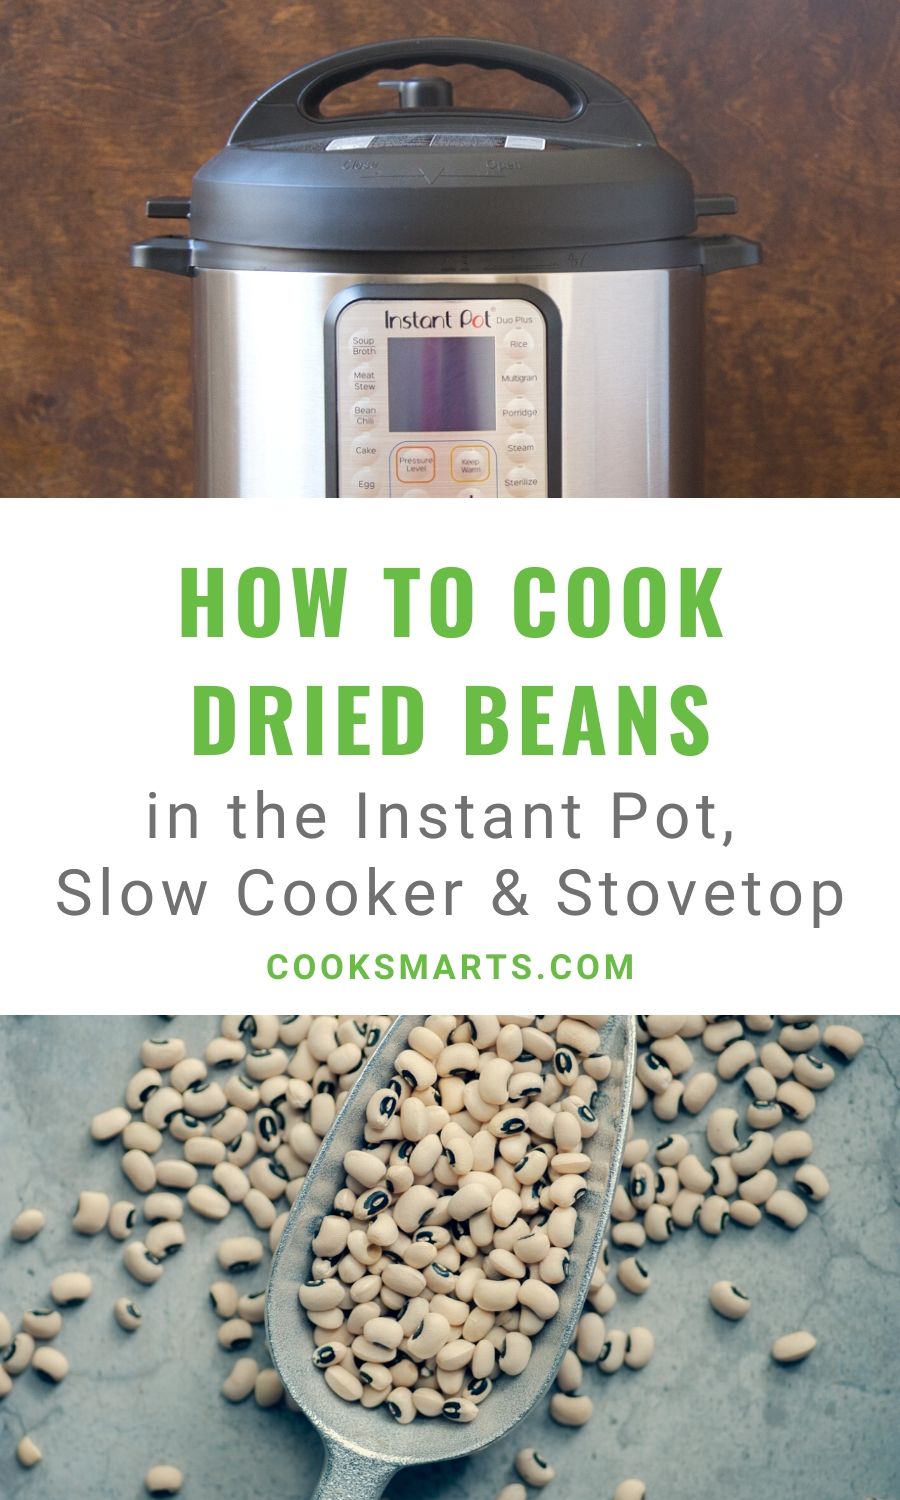 How to Cook Beans from Scratch | Cook Smarts